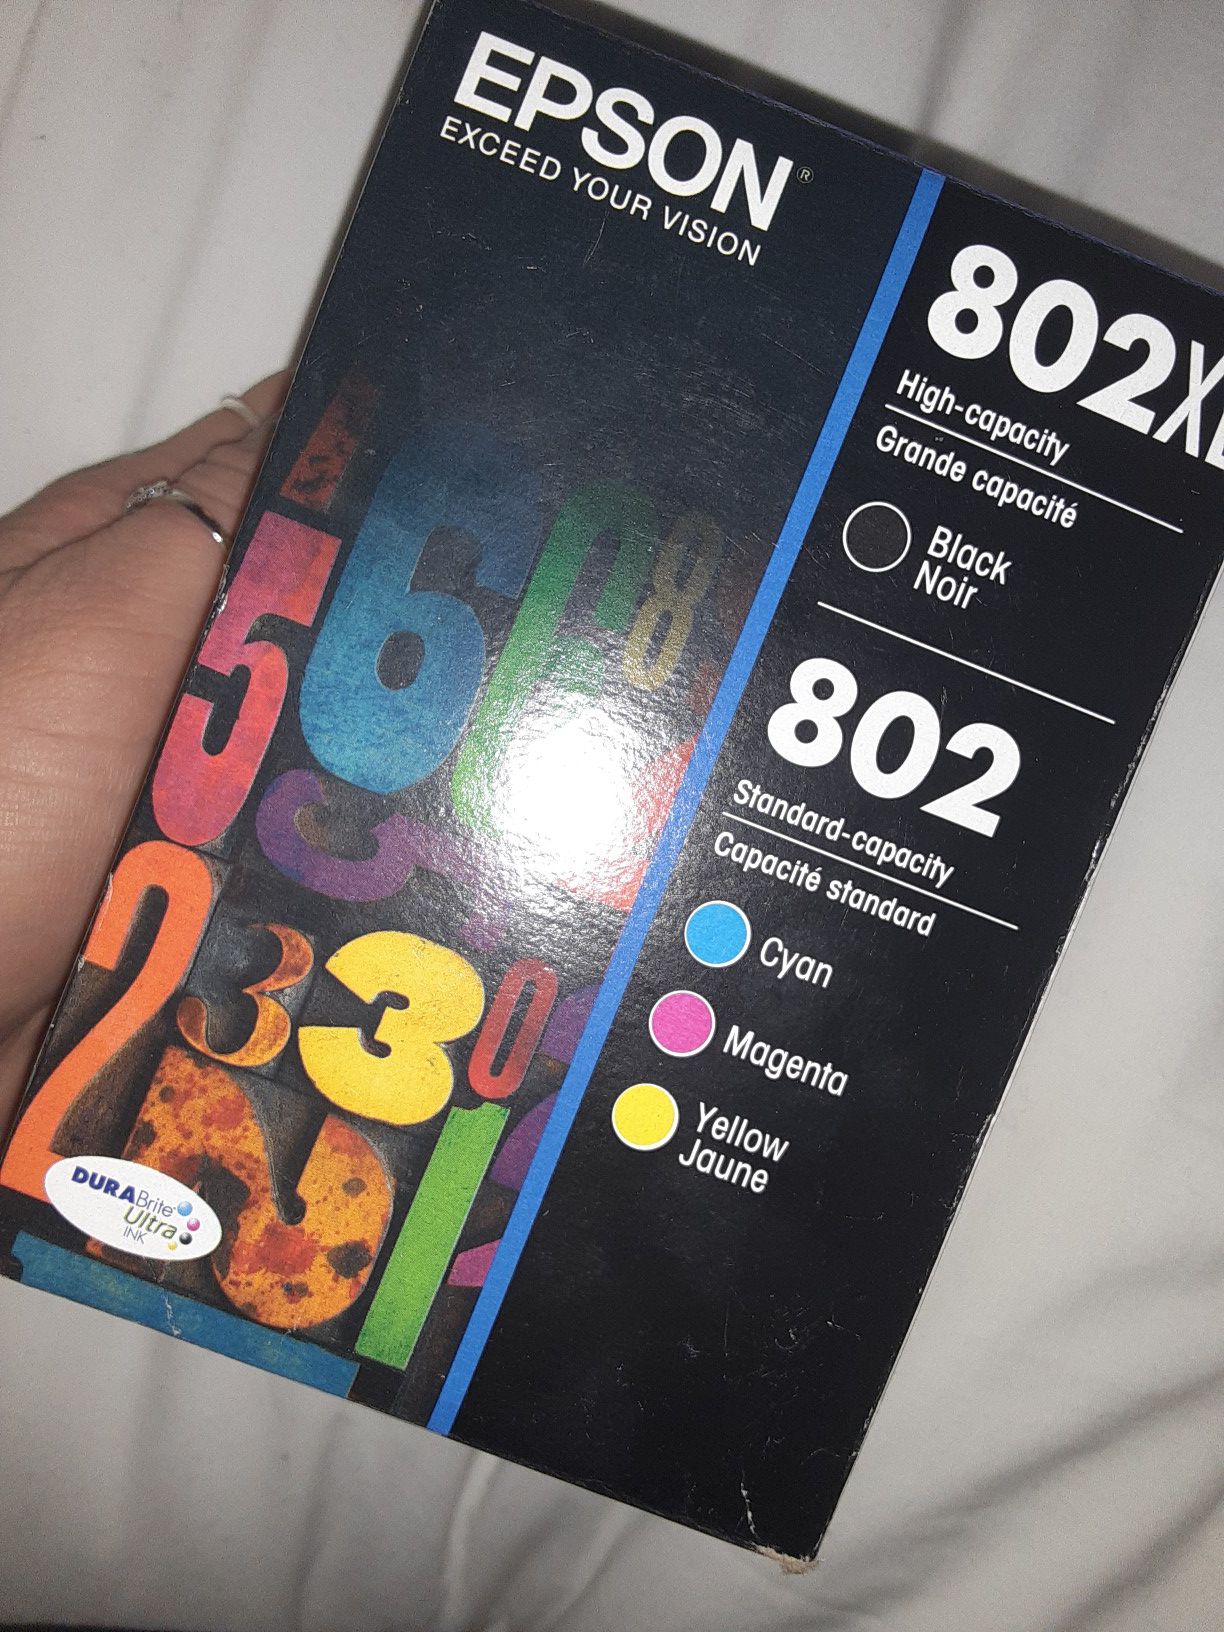 Epson 802 xl ink black & color // Brand New